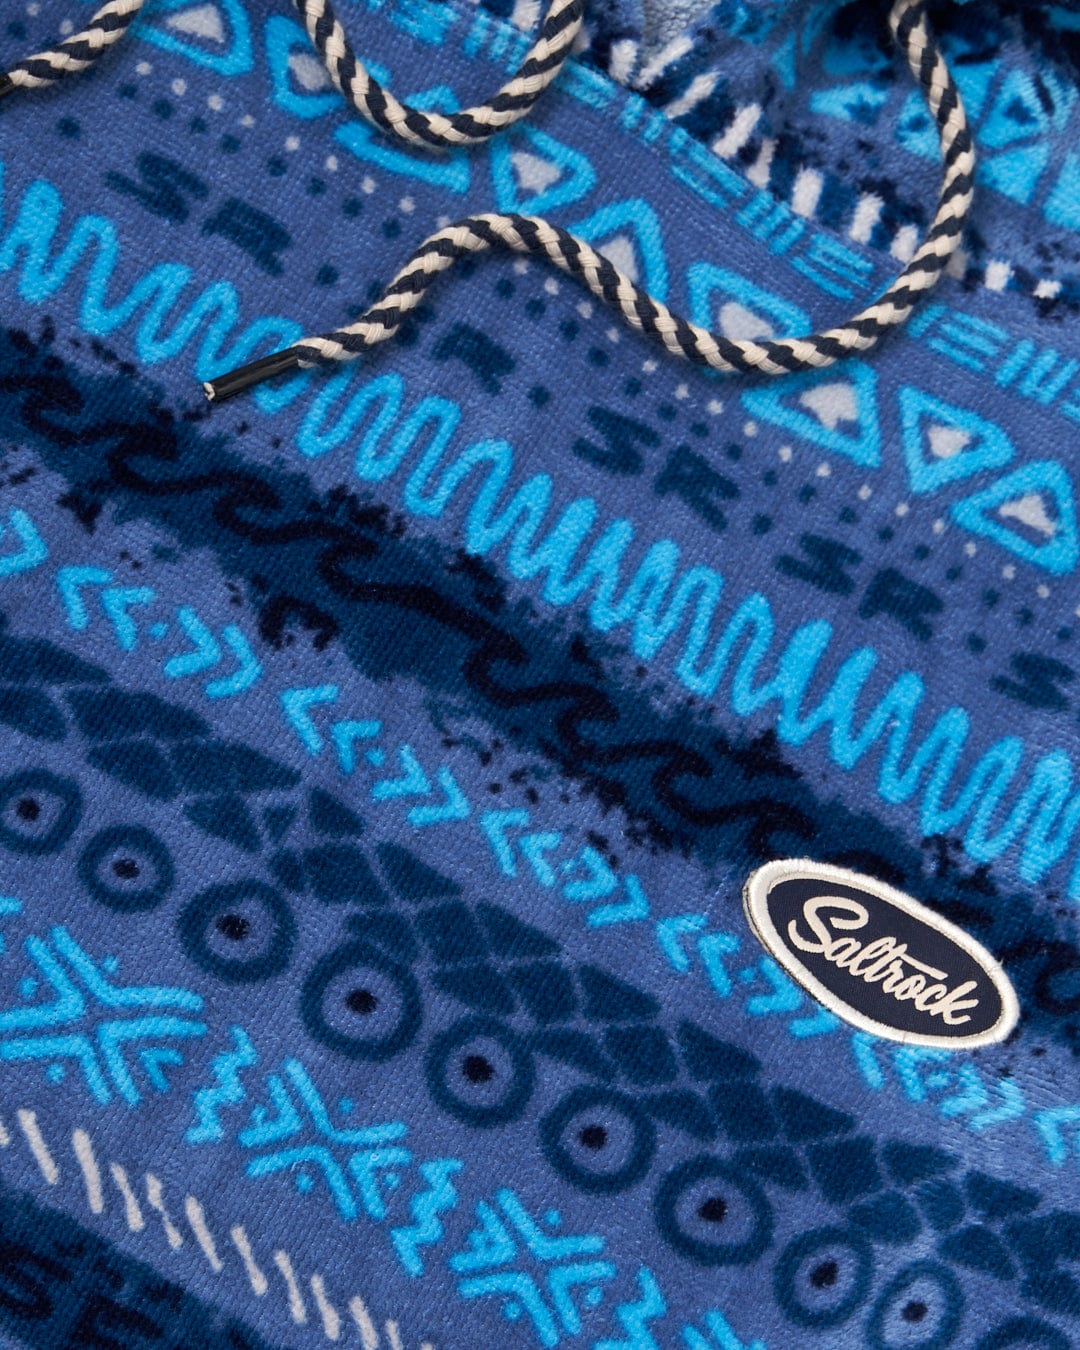 Close-up of a blue vintage stripe patterned fabric with a "Saltrock" logo tag and a white twisted rope detail.